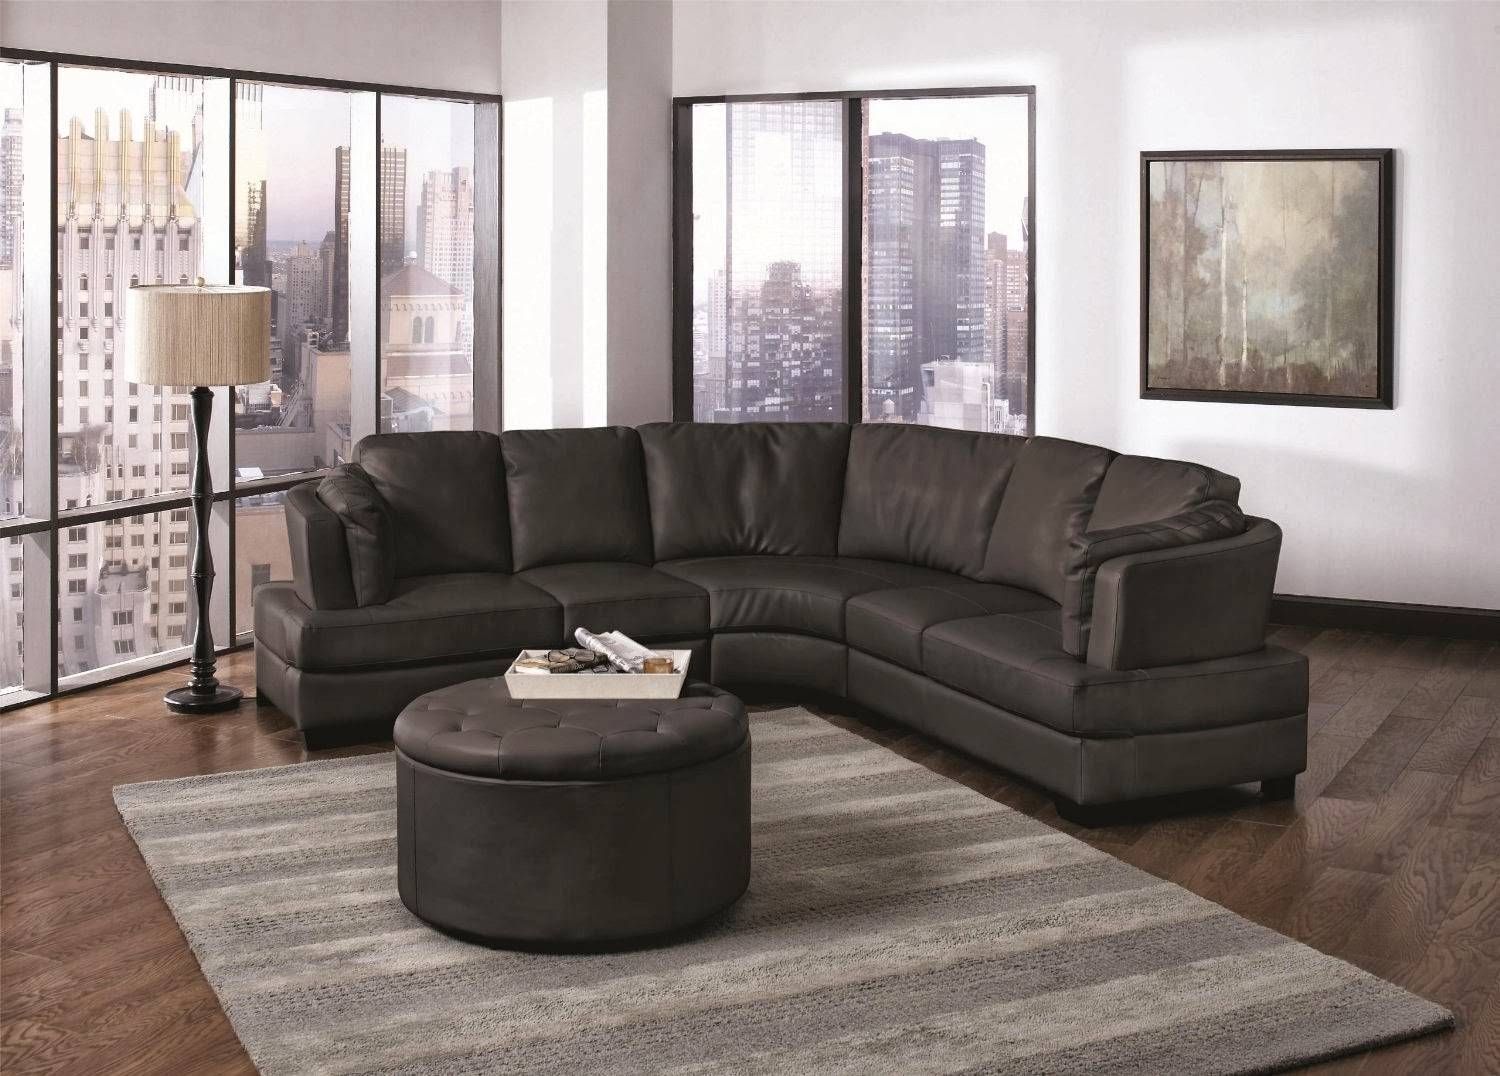 Enchanting Curved Sectional Sofa With Recliner 44 With Additional With Regard To Curved Sectional Sofas With Recliner (Photo 11 of 15)